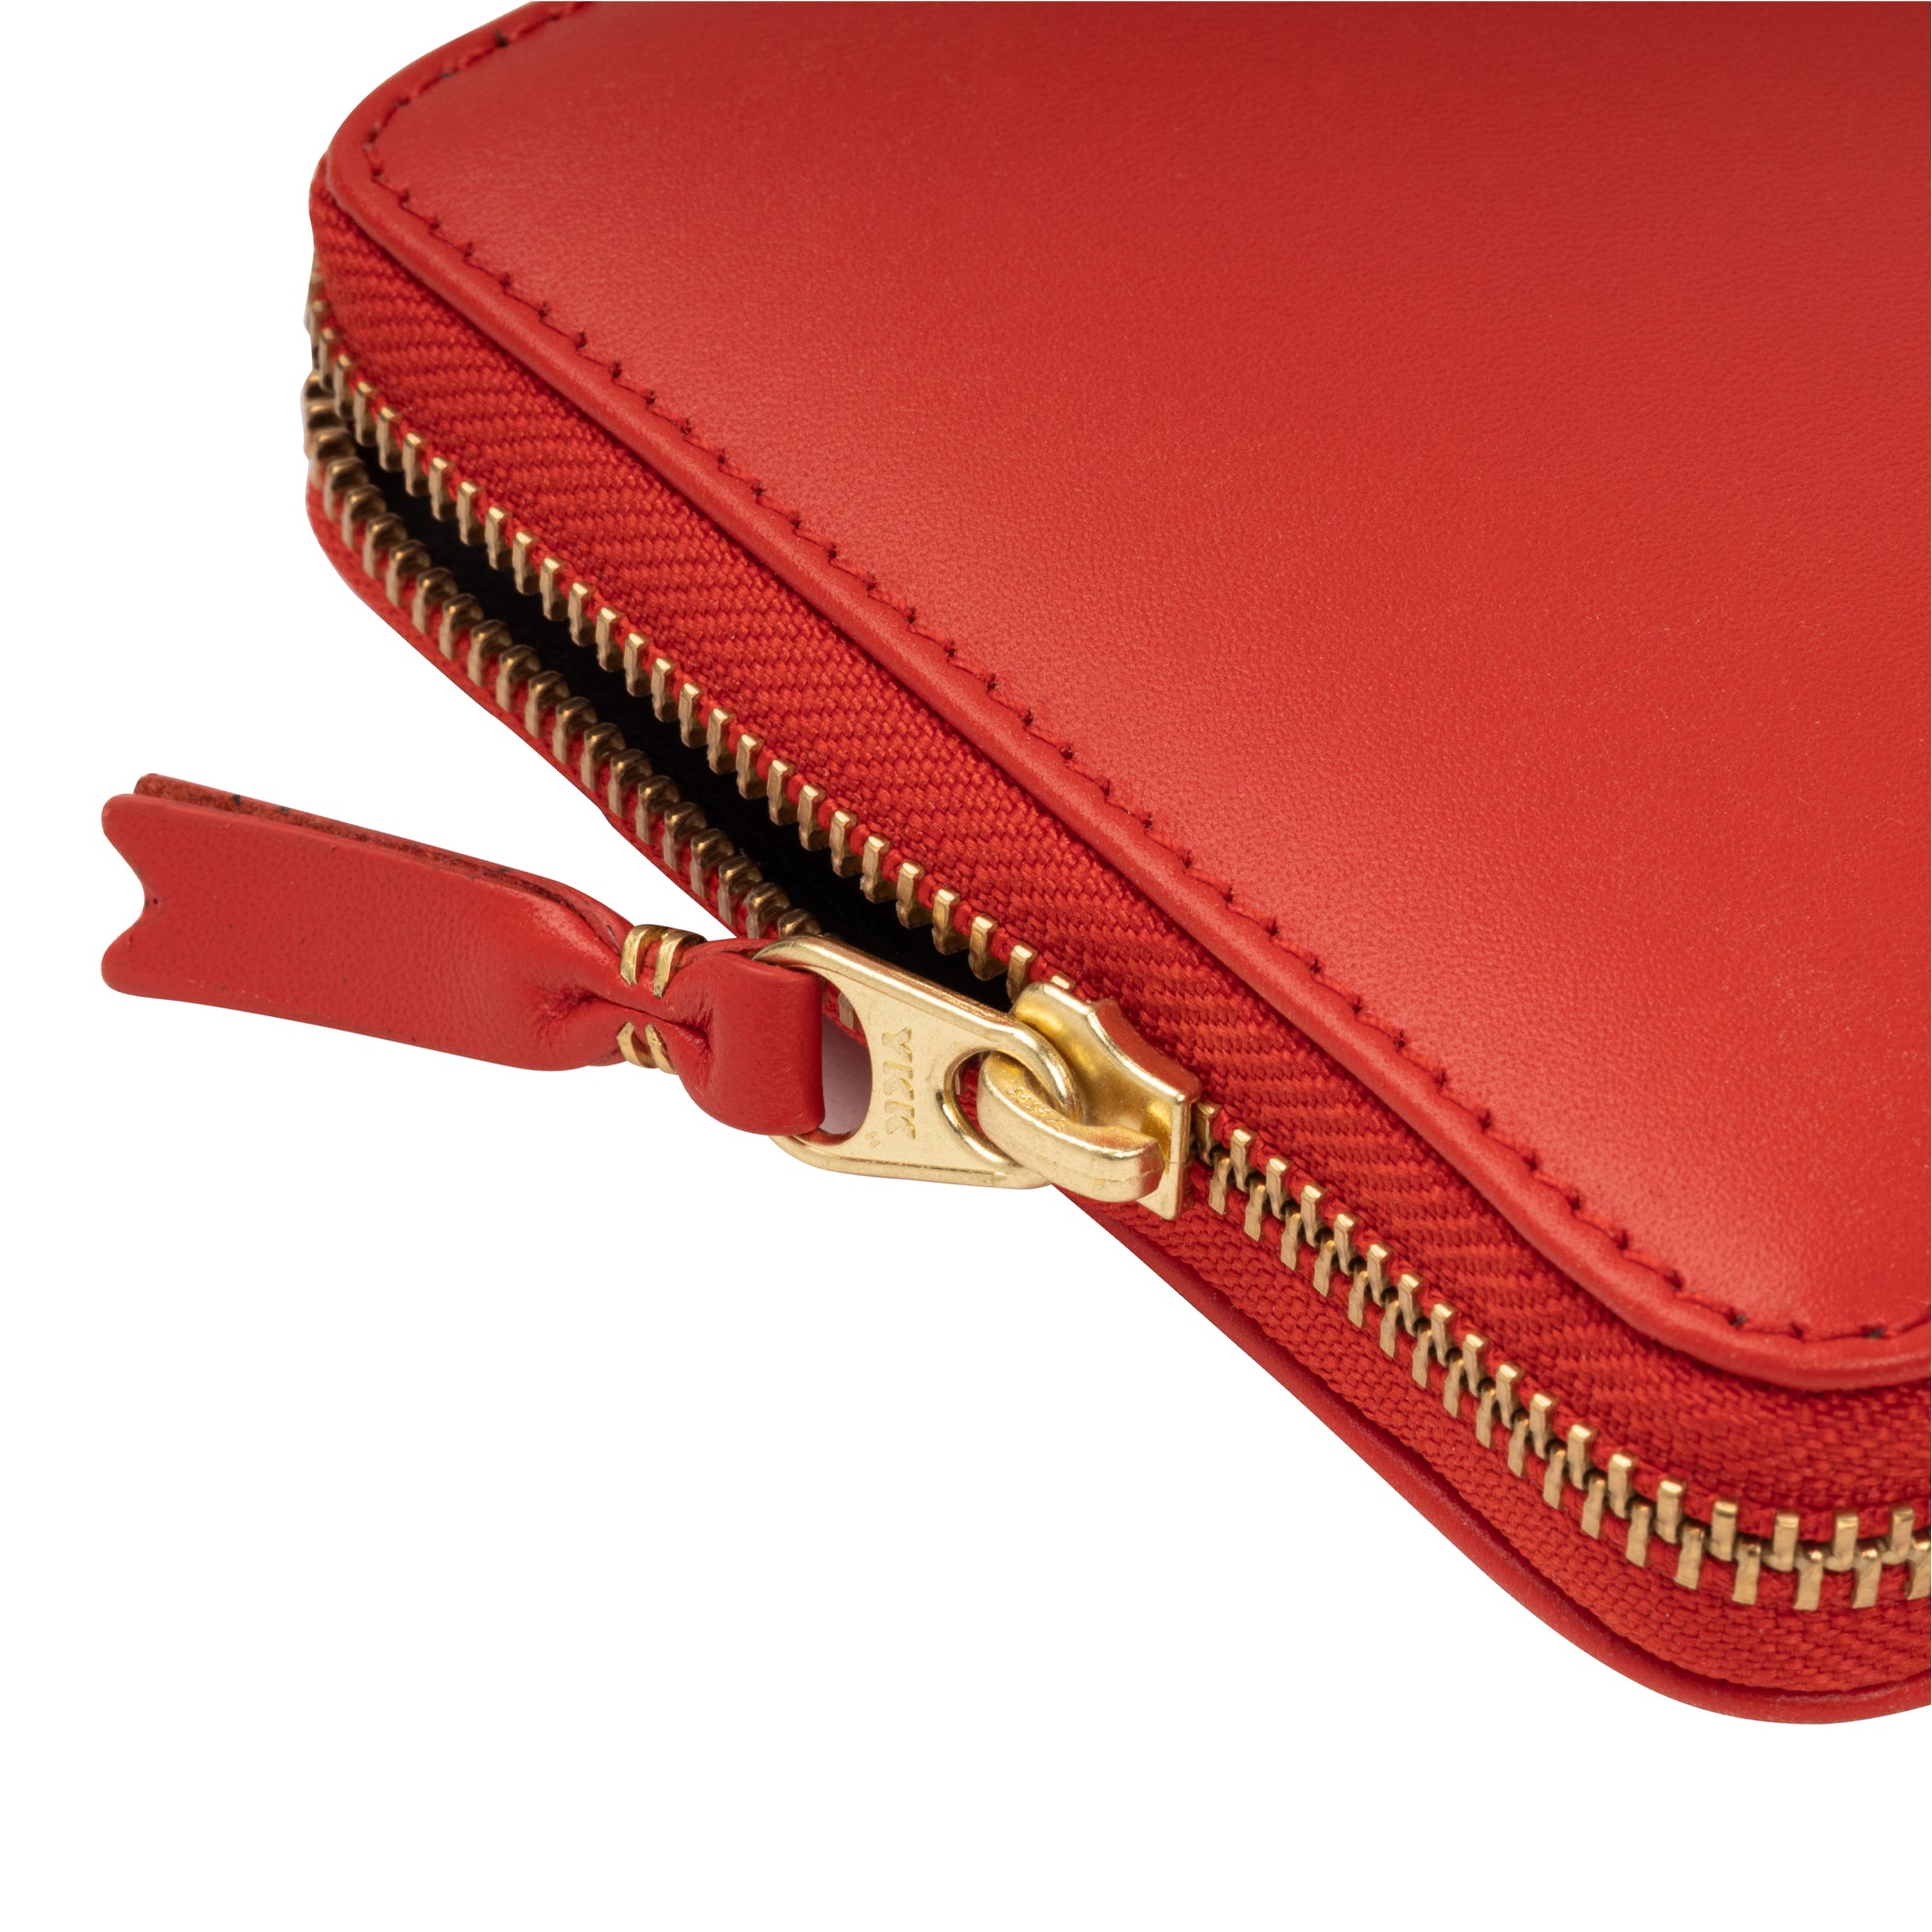 CDG WALLET - Colored Leather Wallet - (SA2110 Red) view 3